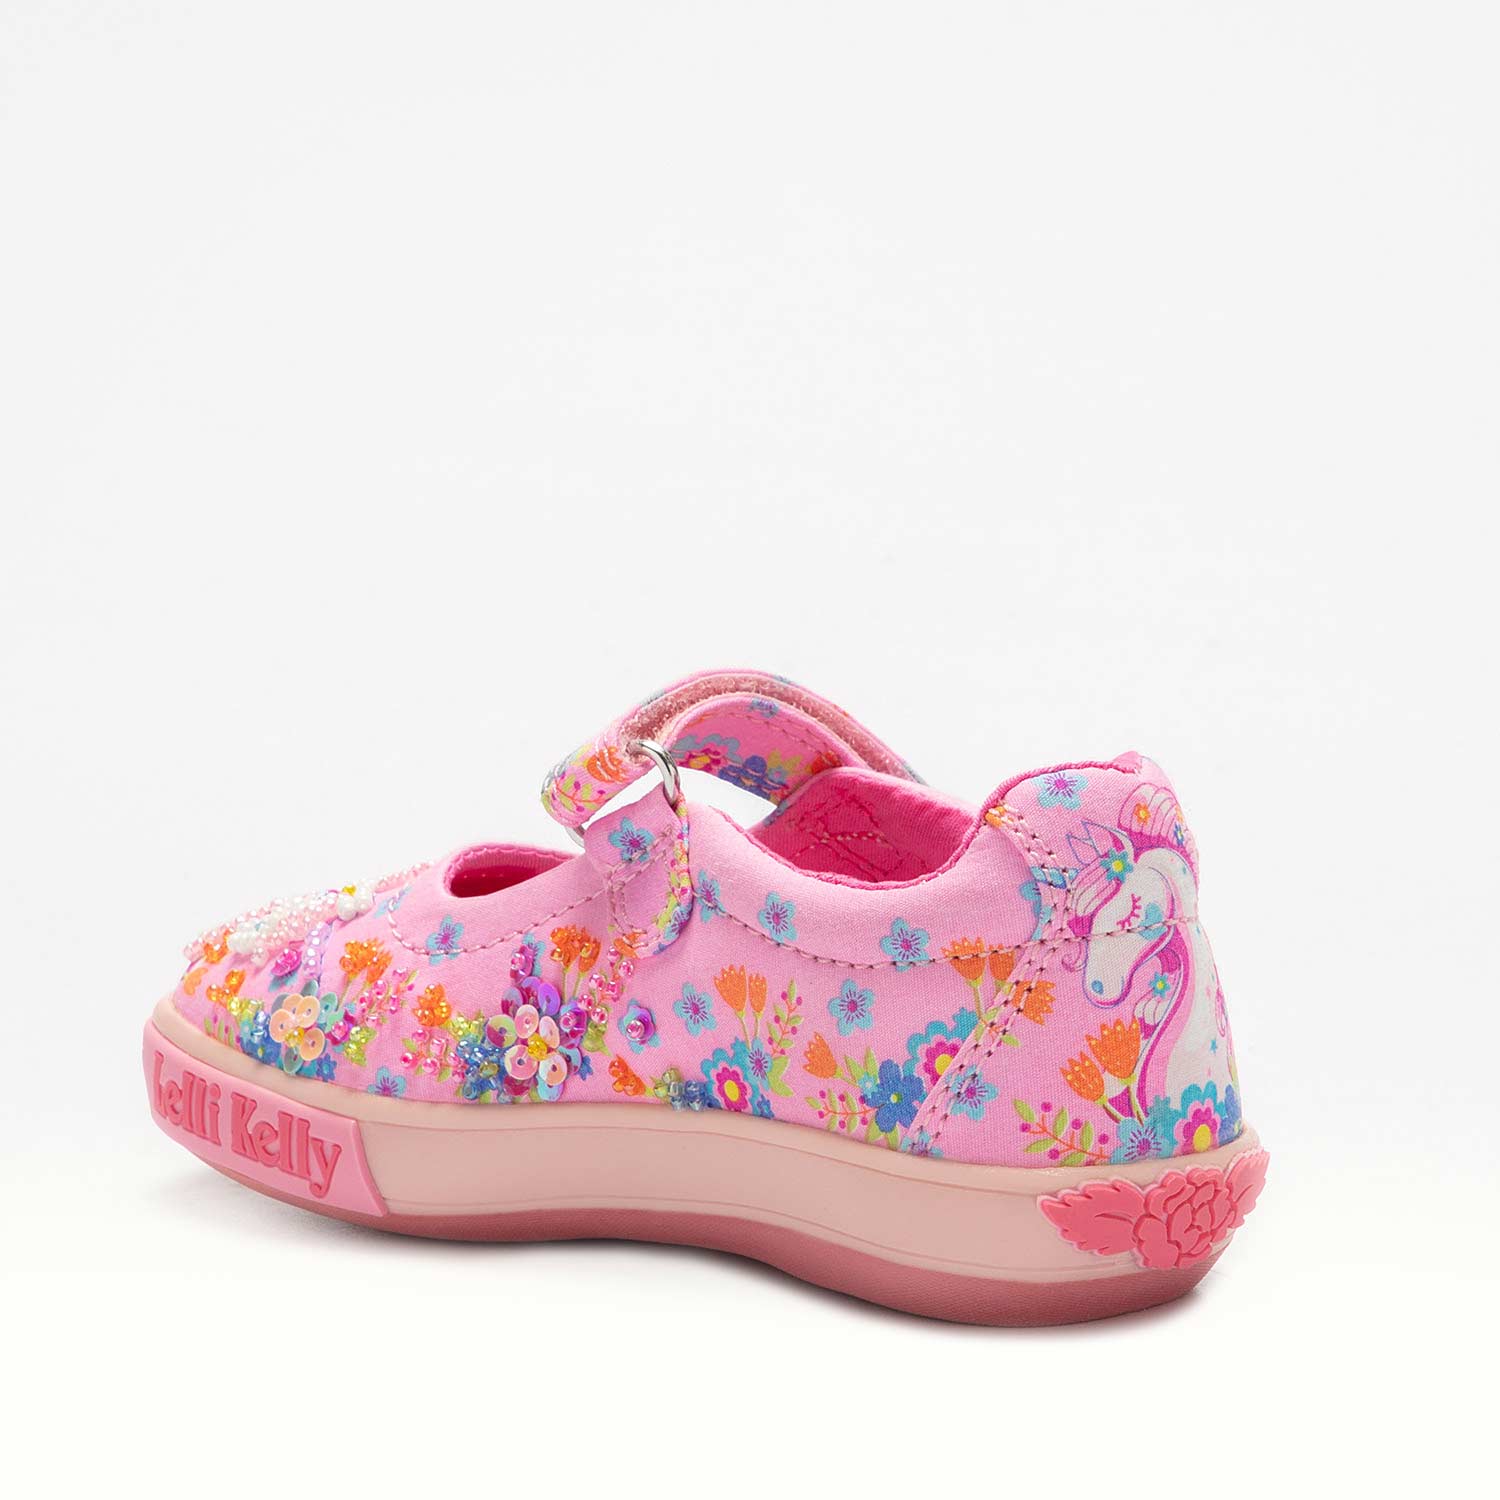 LELLI KELLY CANVAS-LKED2032- FLORENCE-UNICORN-ROSA GLITTER – Chicos &  Chicas Shoes